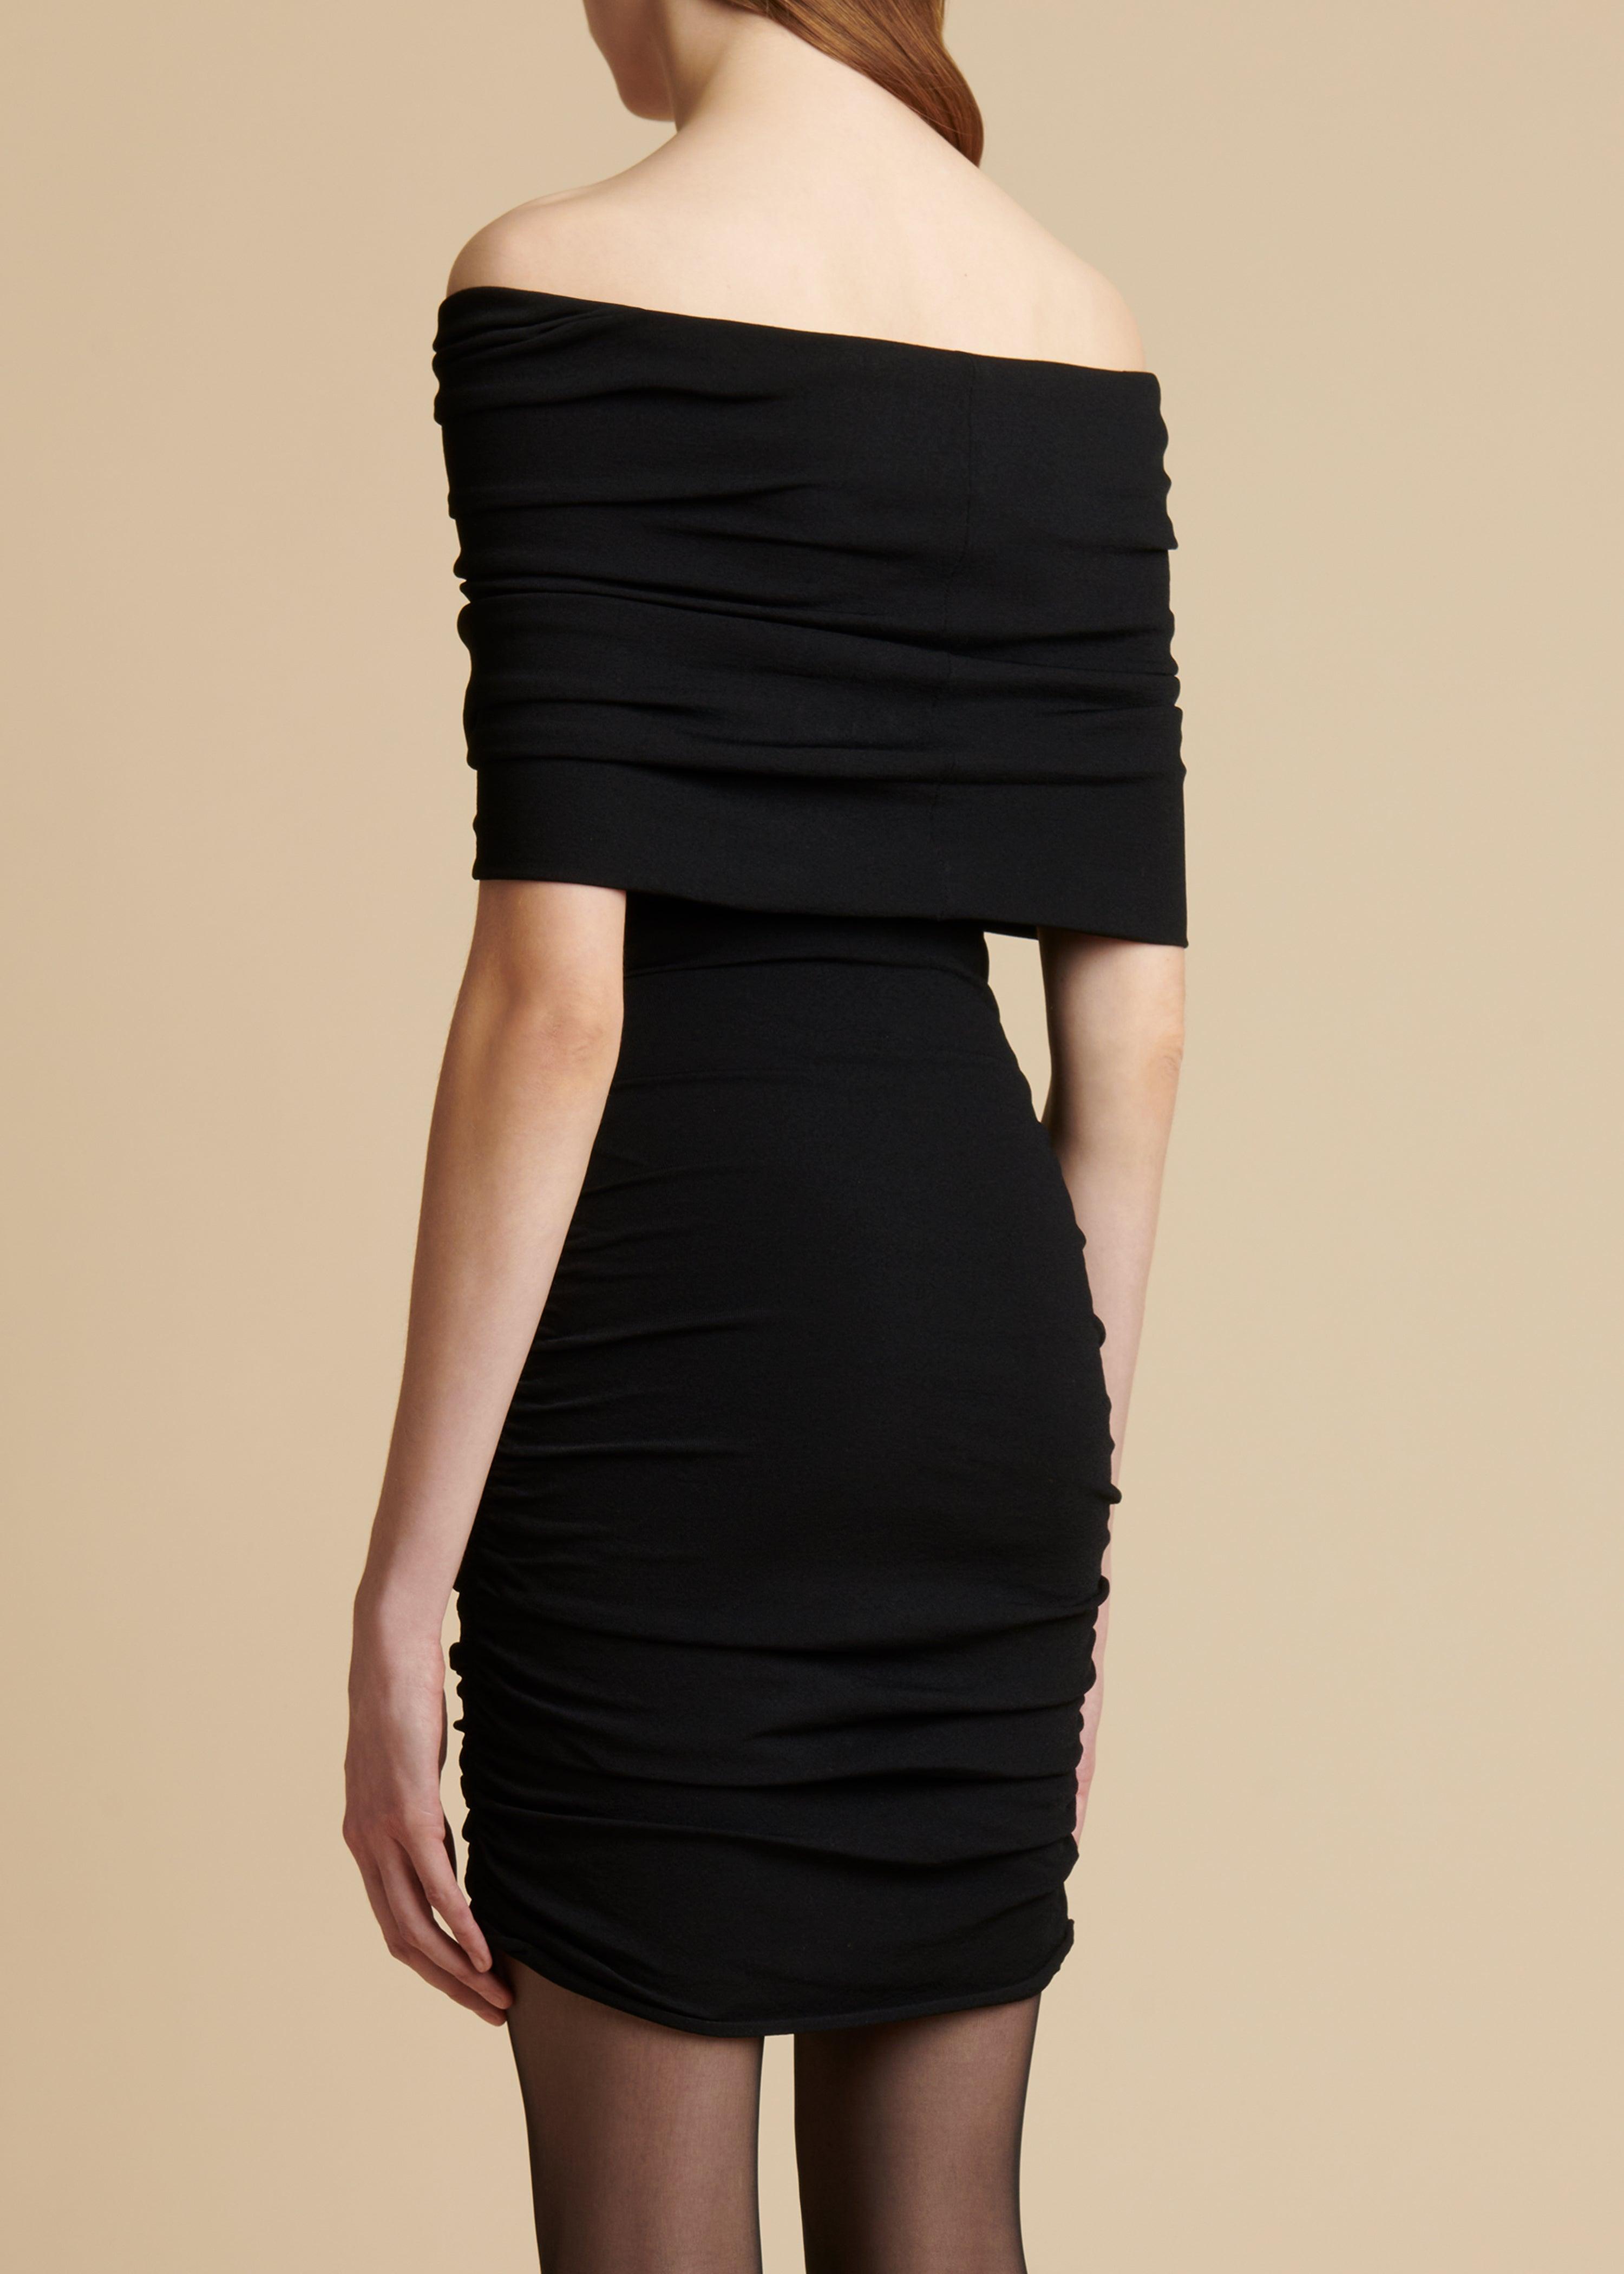 The Aerica Dress in Black - The Iconic Issue